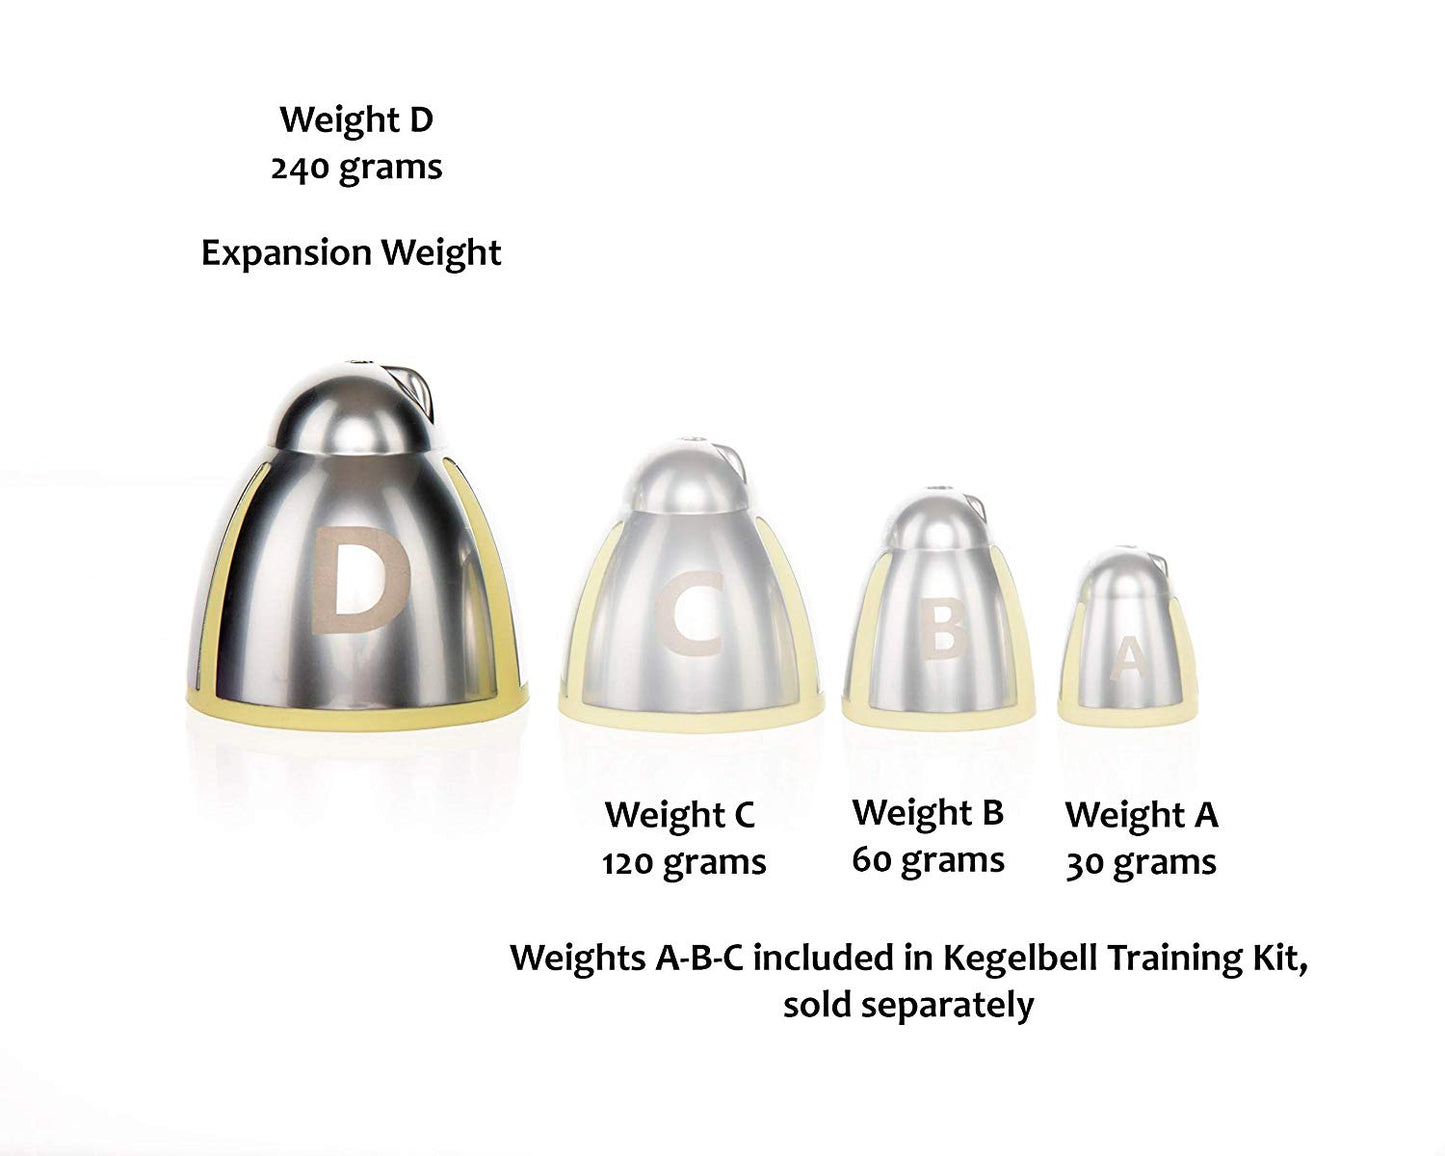 Kegelbell Extension Weight (Kit Sold Separately)